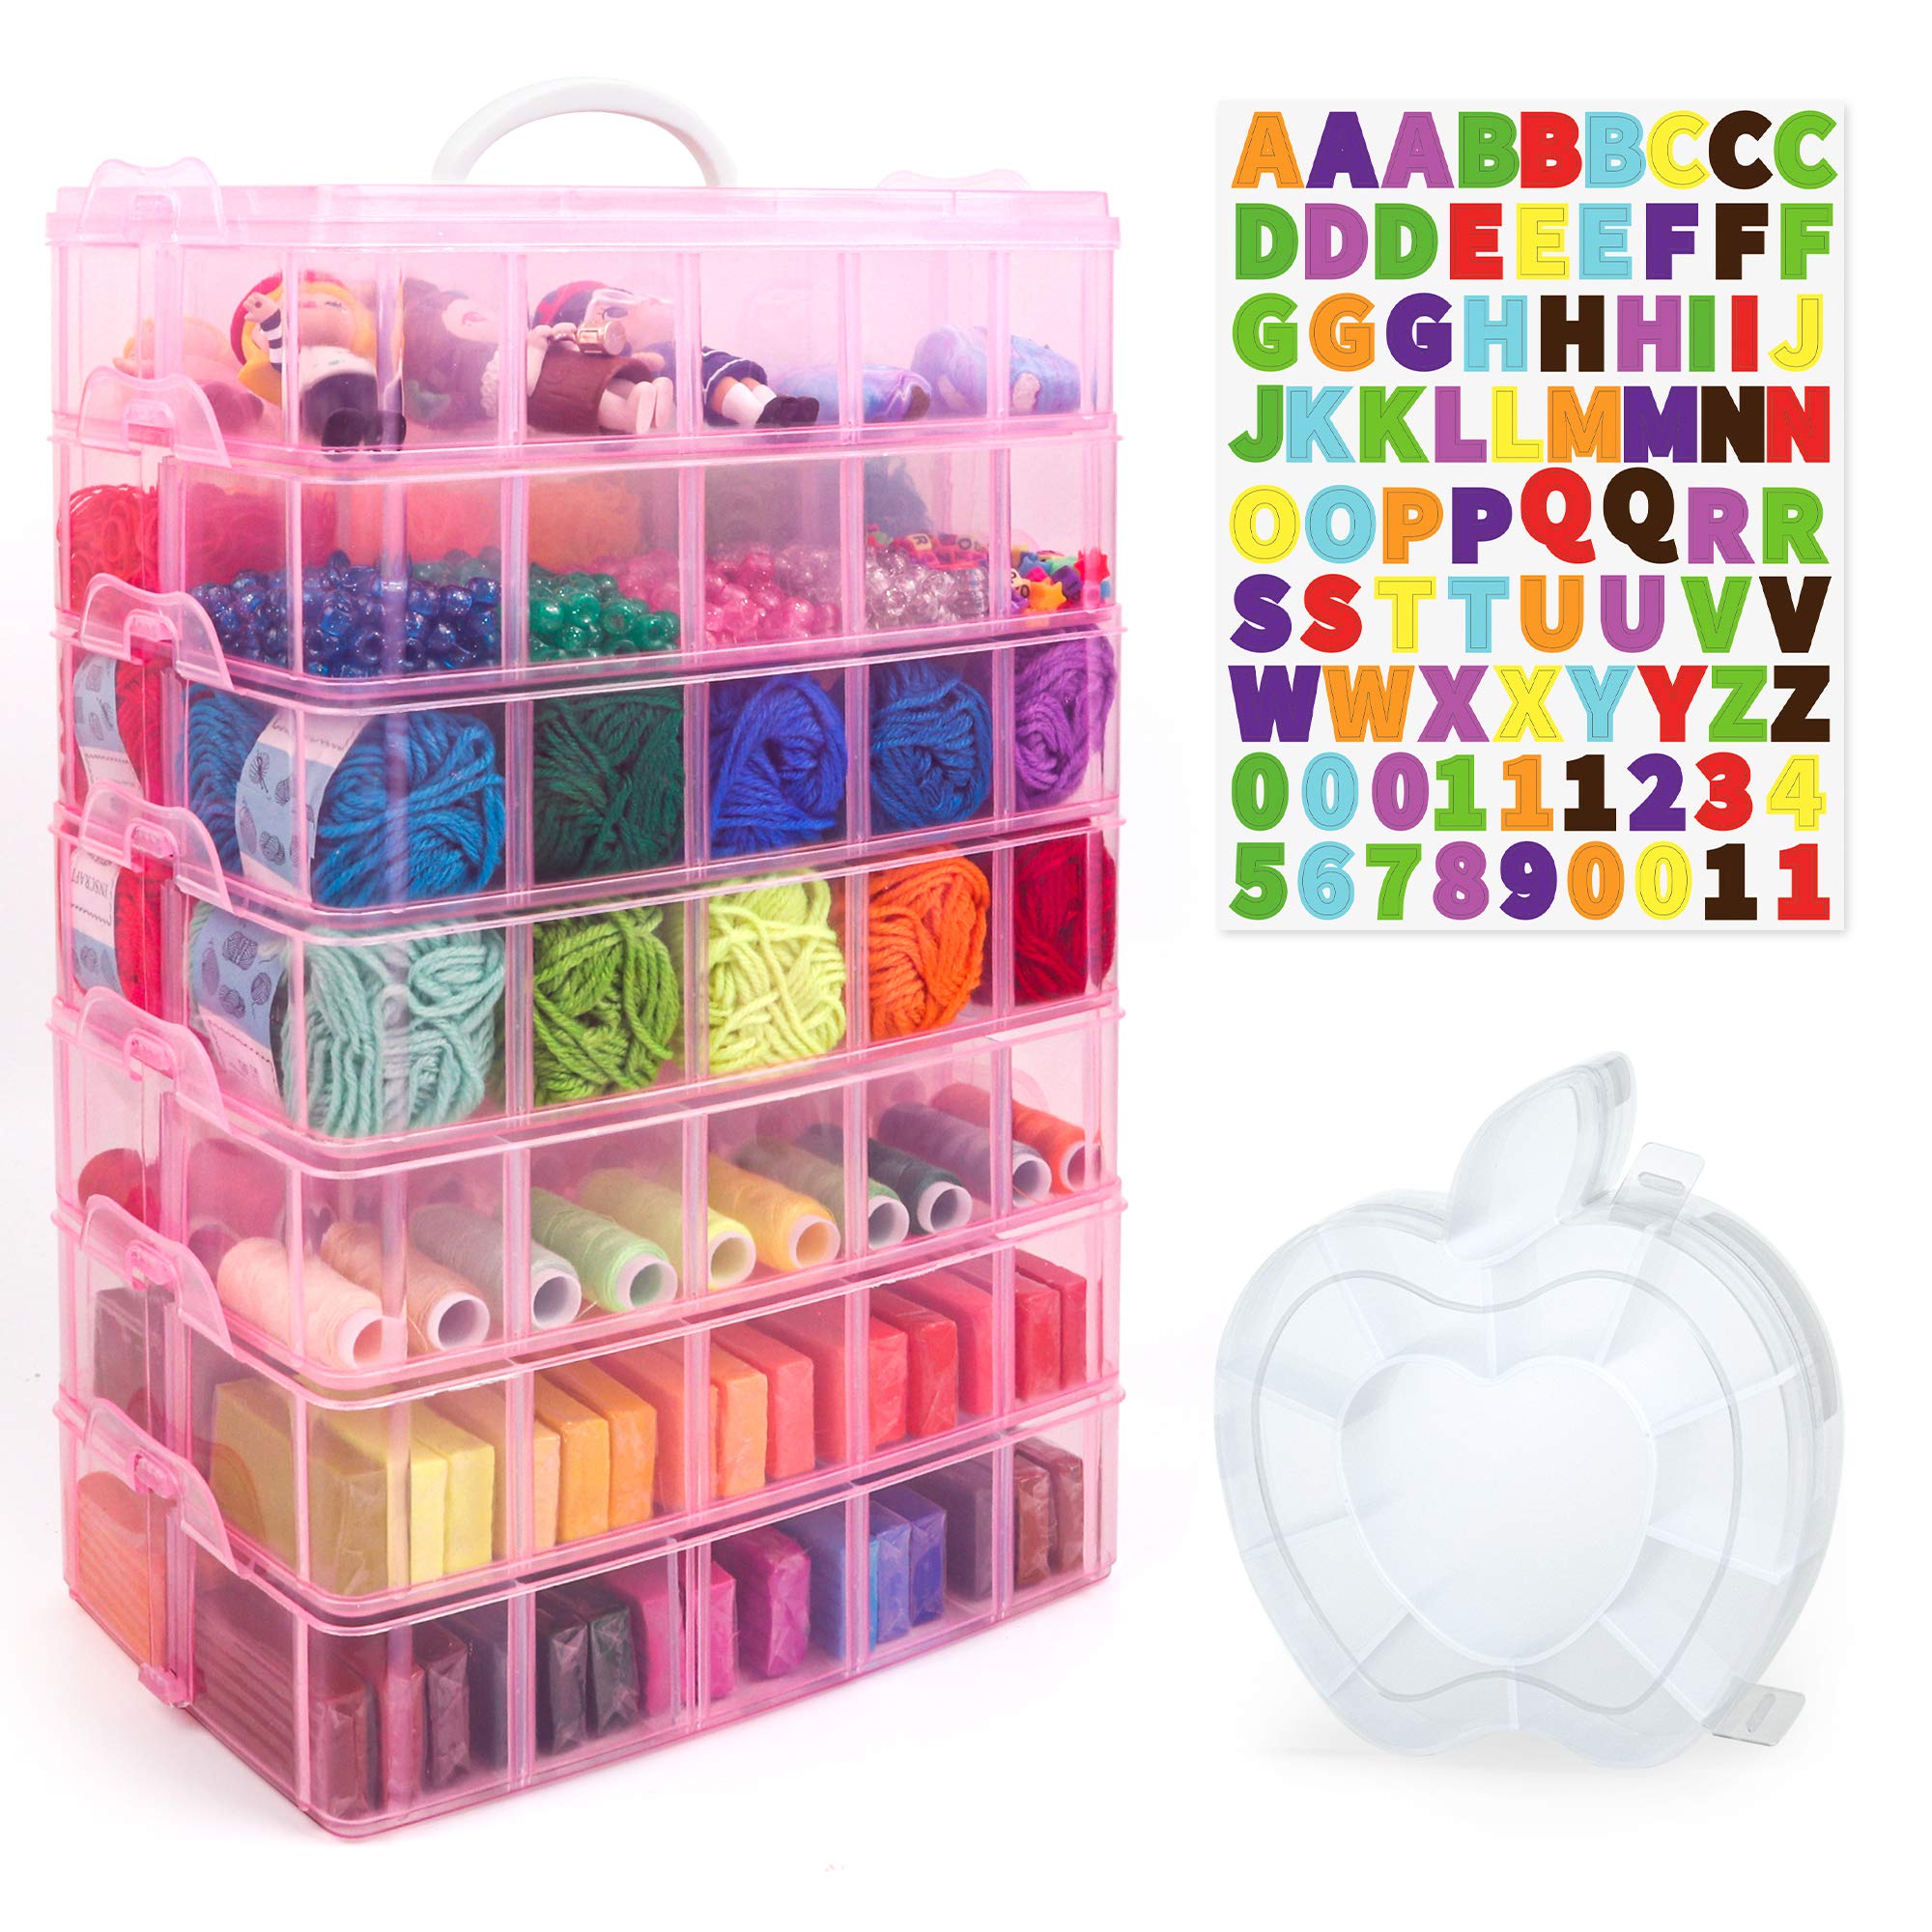 Storage Cases and Containers for your Loom, Elastics Bands and Jewelry